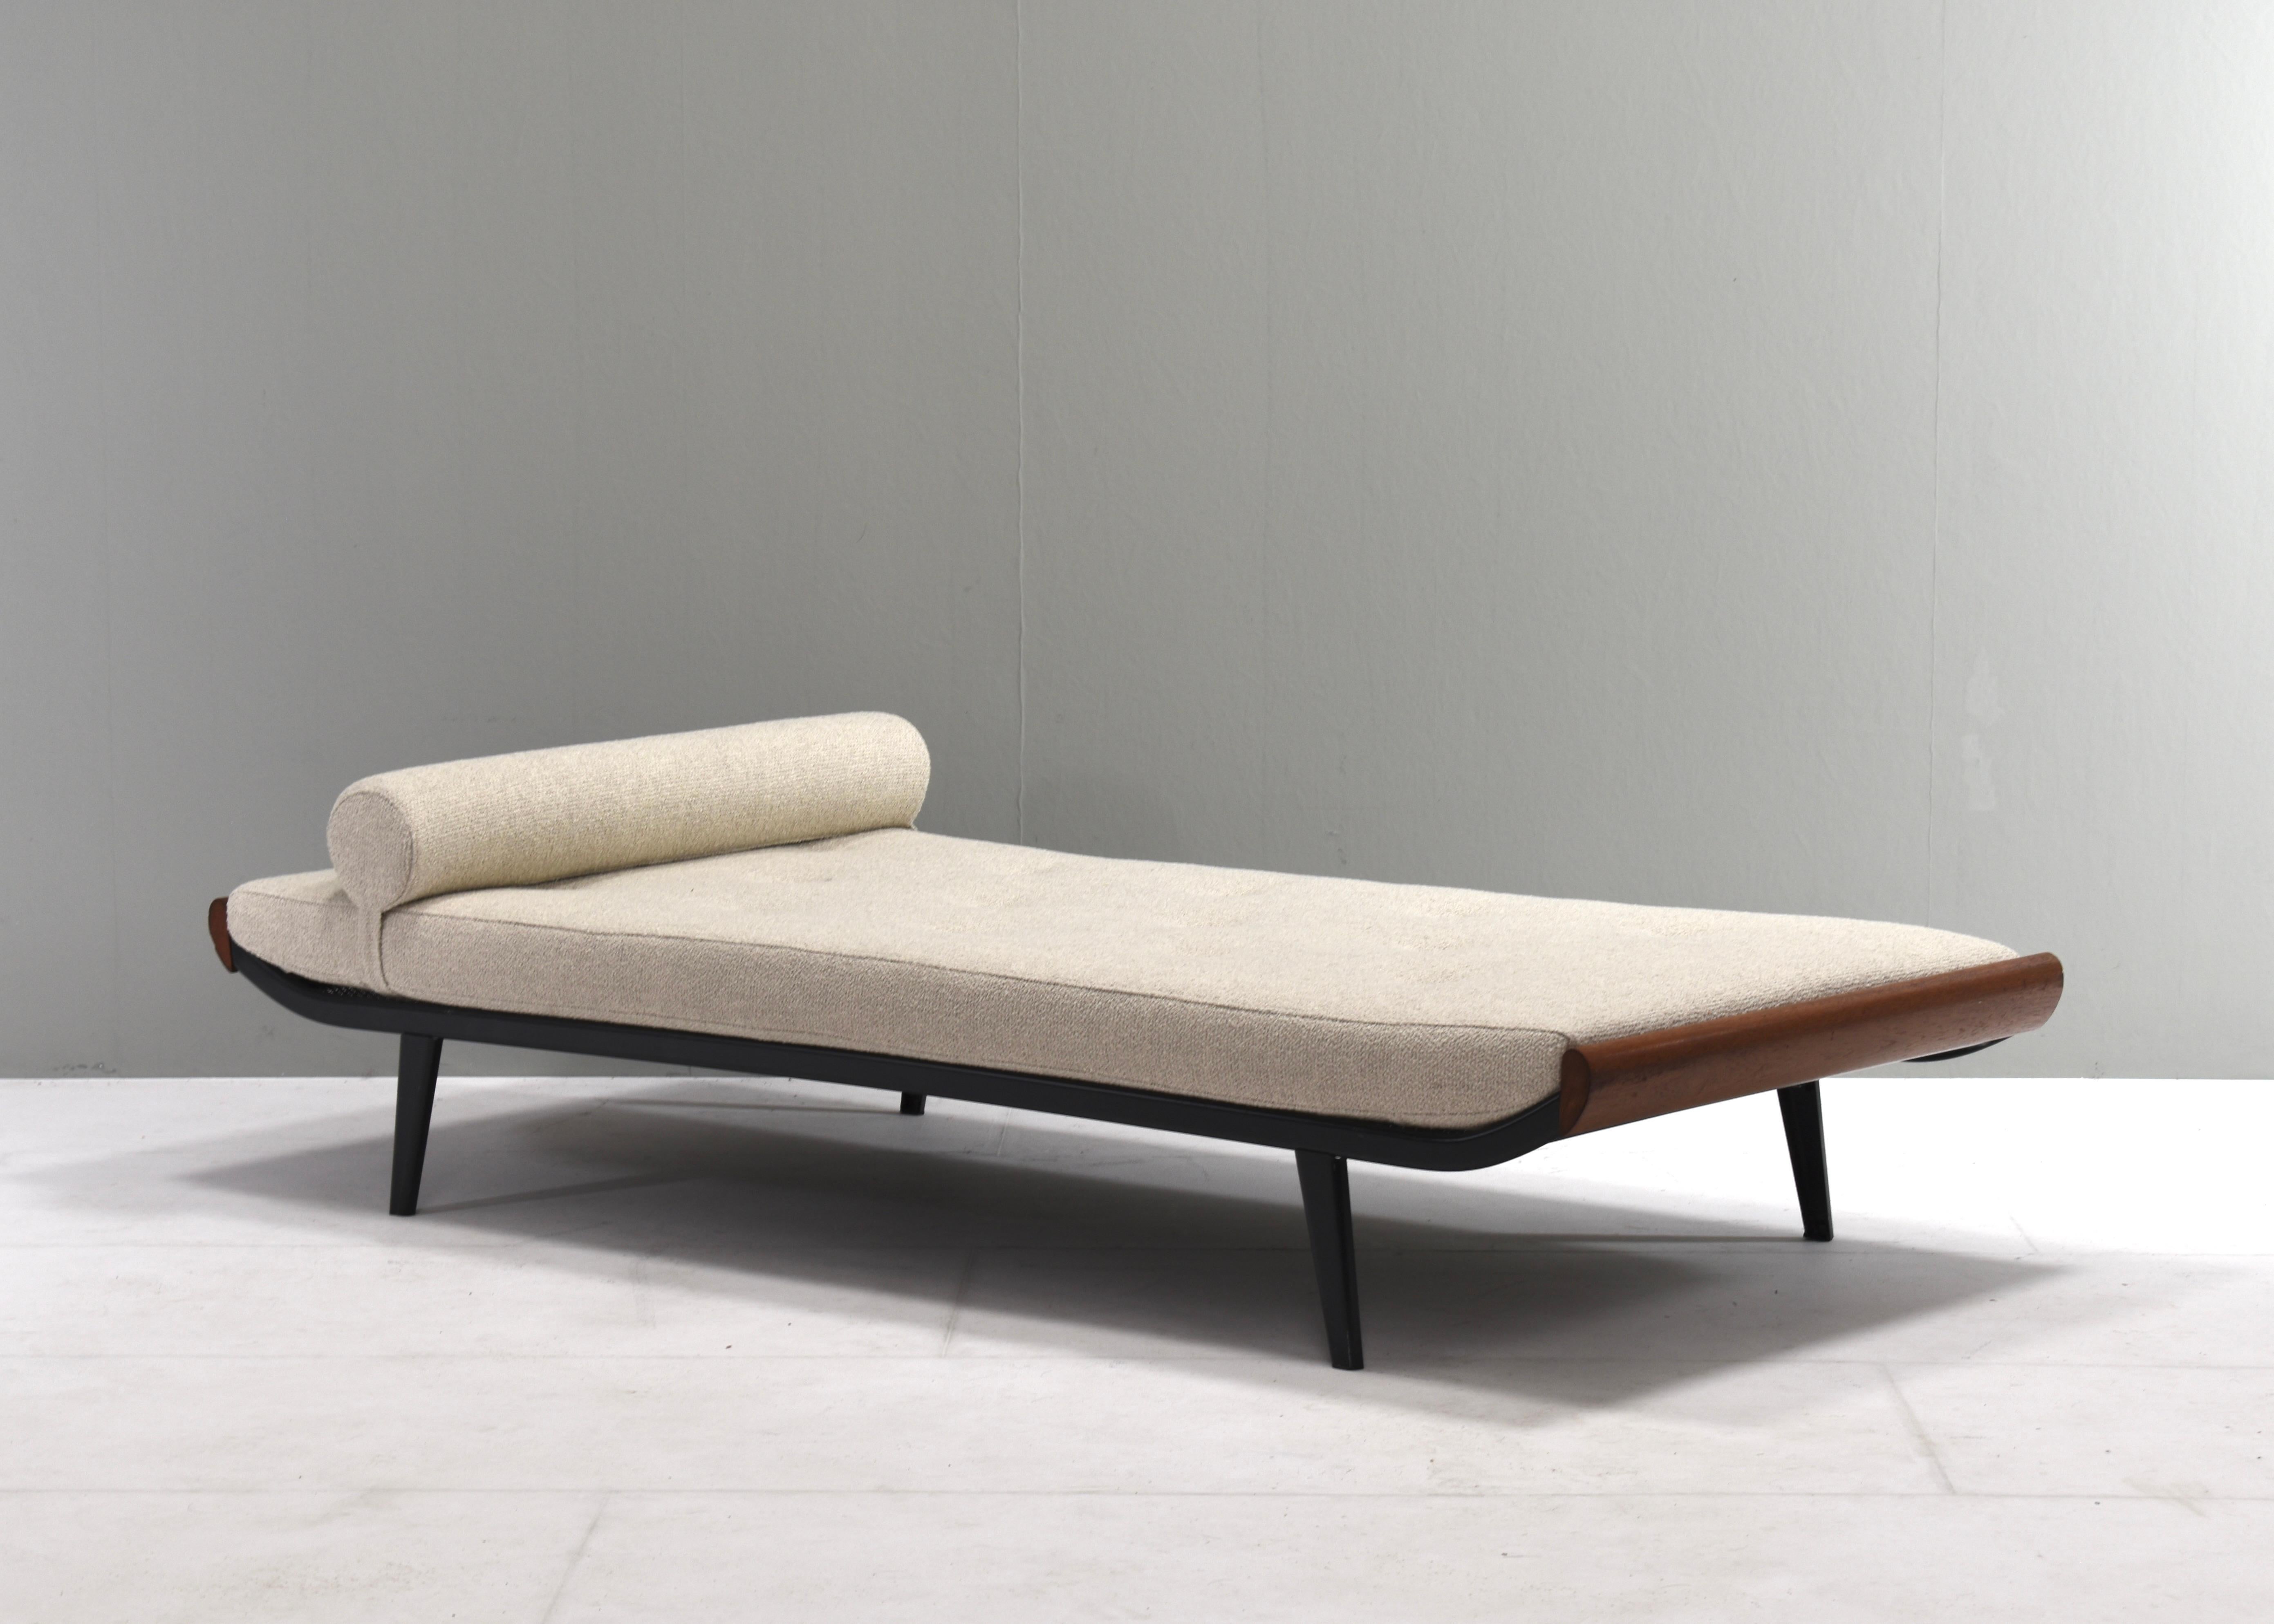 Dutch Cleopatra Daybed Designed by Cordemeyer for Auping, Netherlands, 1954